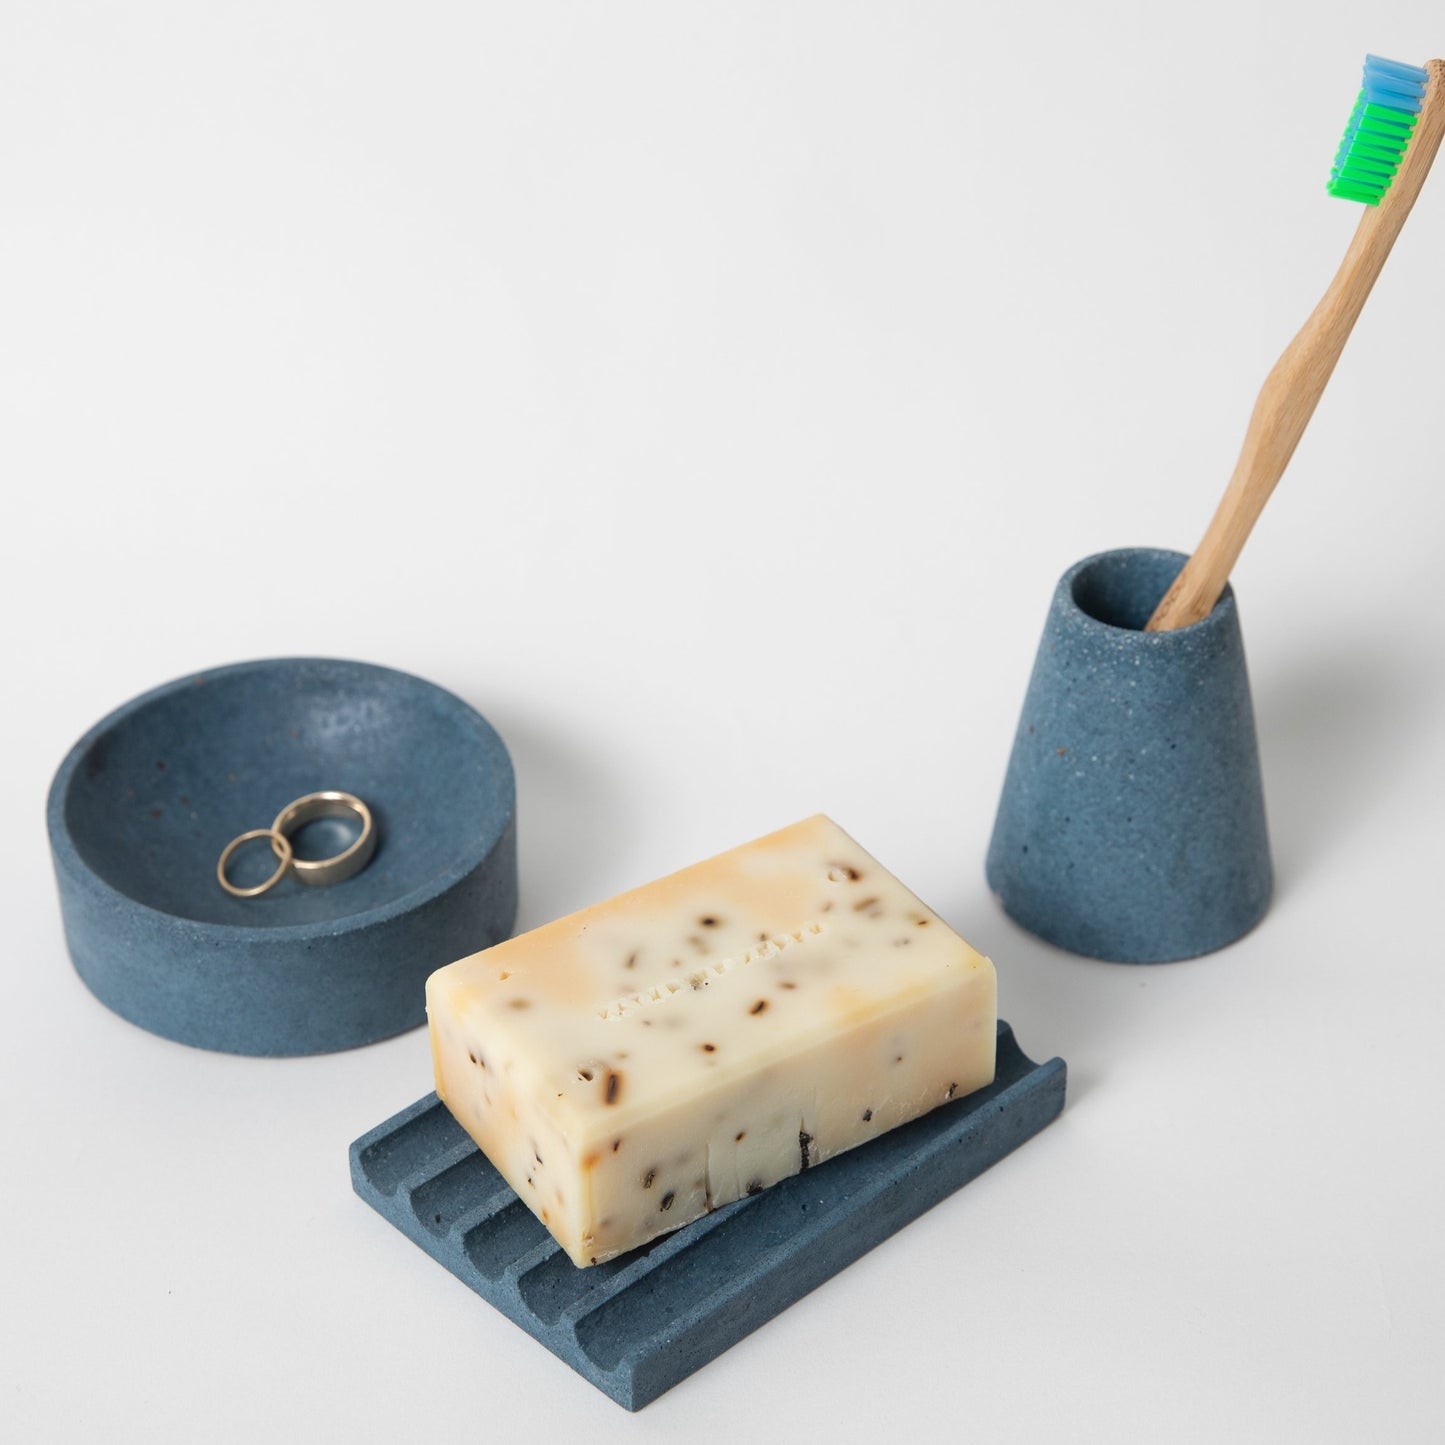 Soap dish, toothbrush holder, and a 4" catch all in cobalt terrazzo.